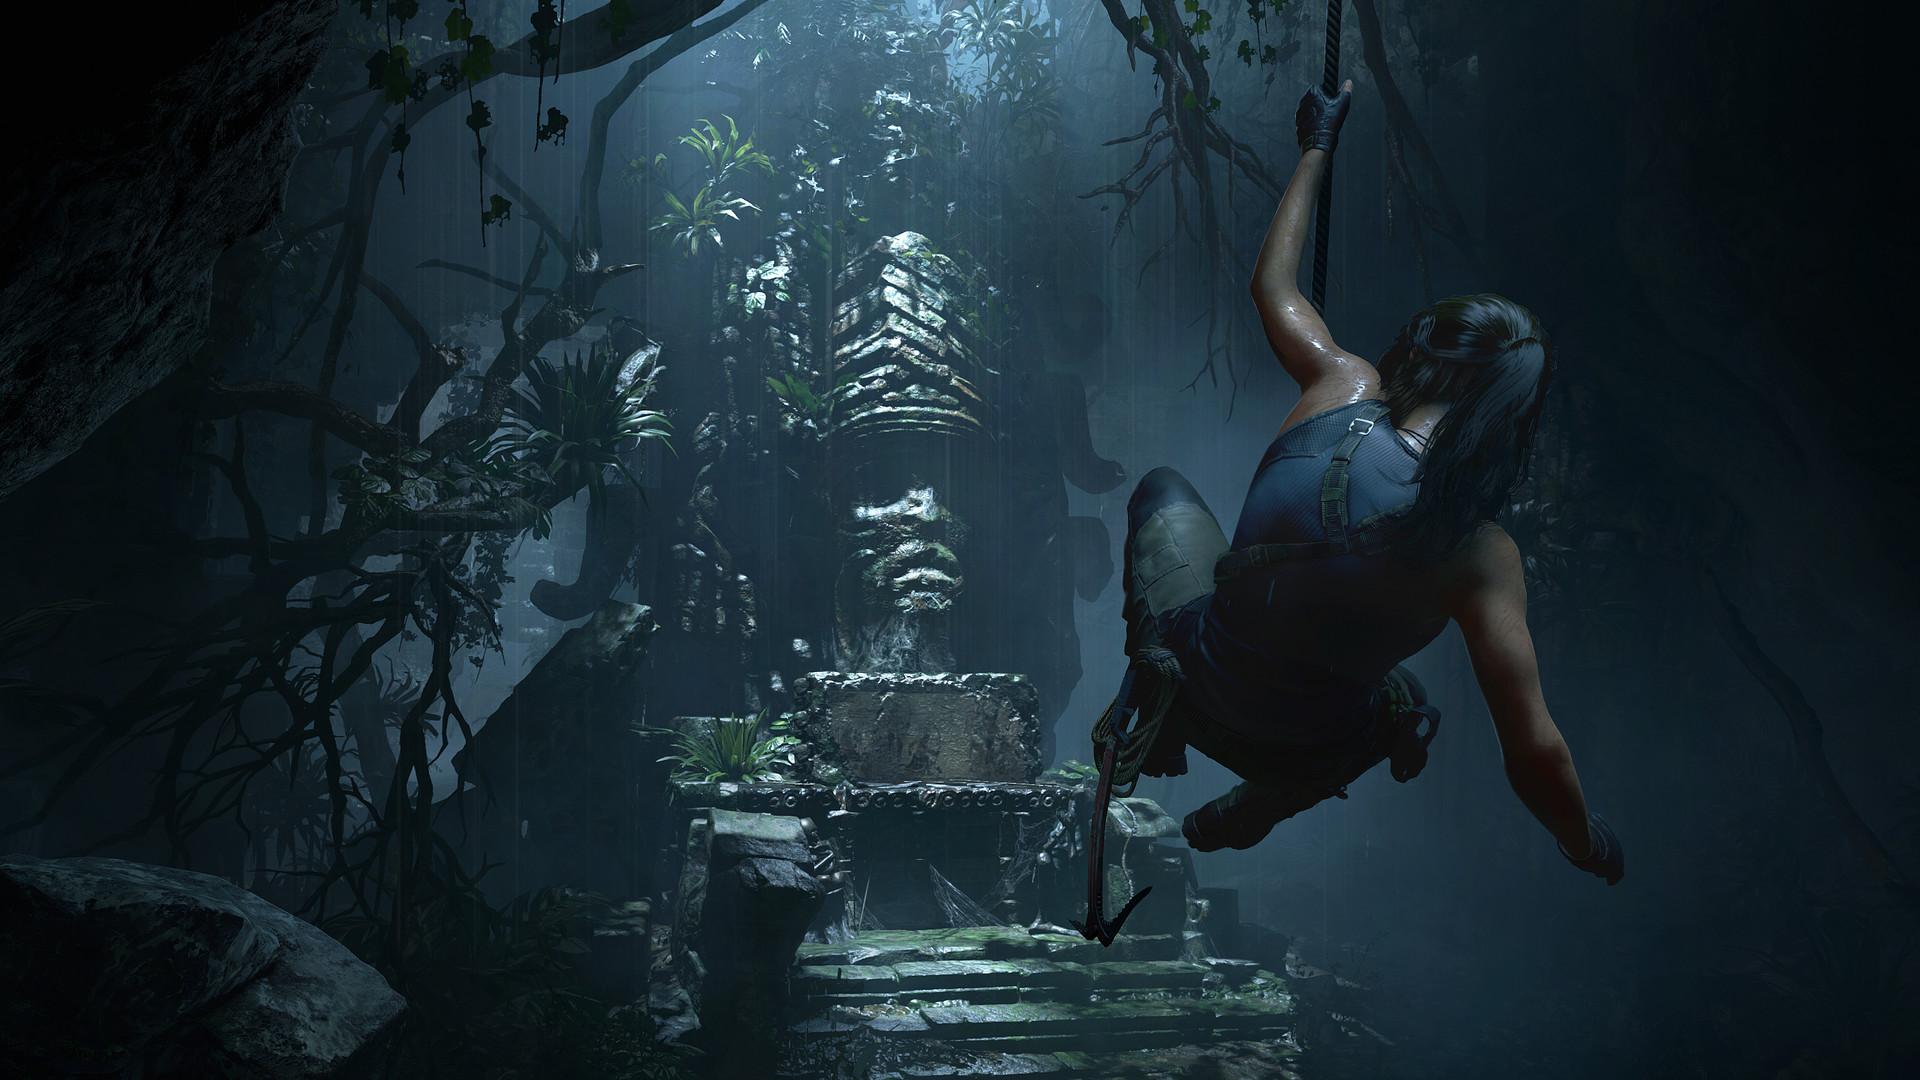 https://media.imgcdn.org/repo/2023/04/shadow-of-the-tomb-raider-definitive-edition/6439c66144332-shadow-of-the-tomb-raider-definitive-edition-screenshot6.jpg